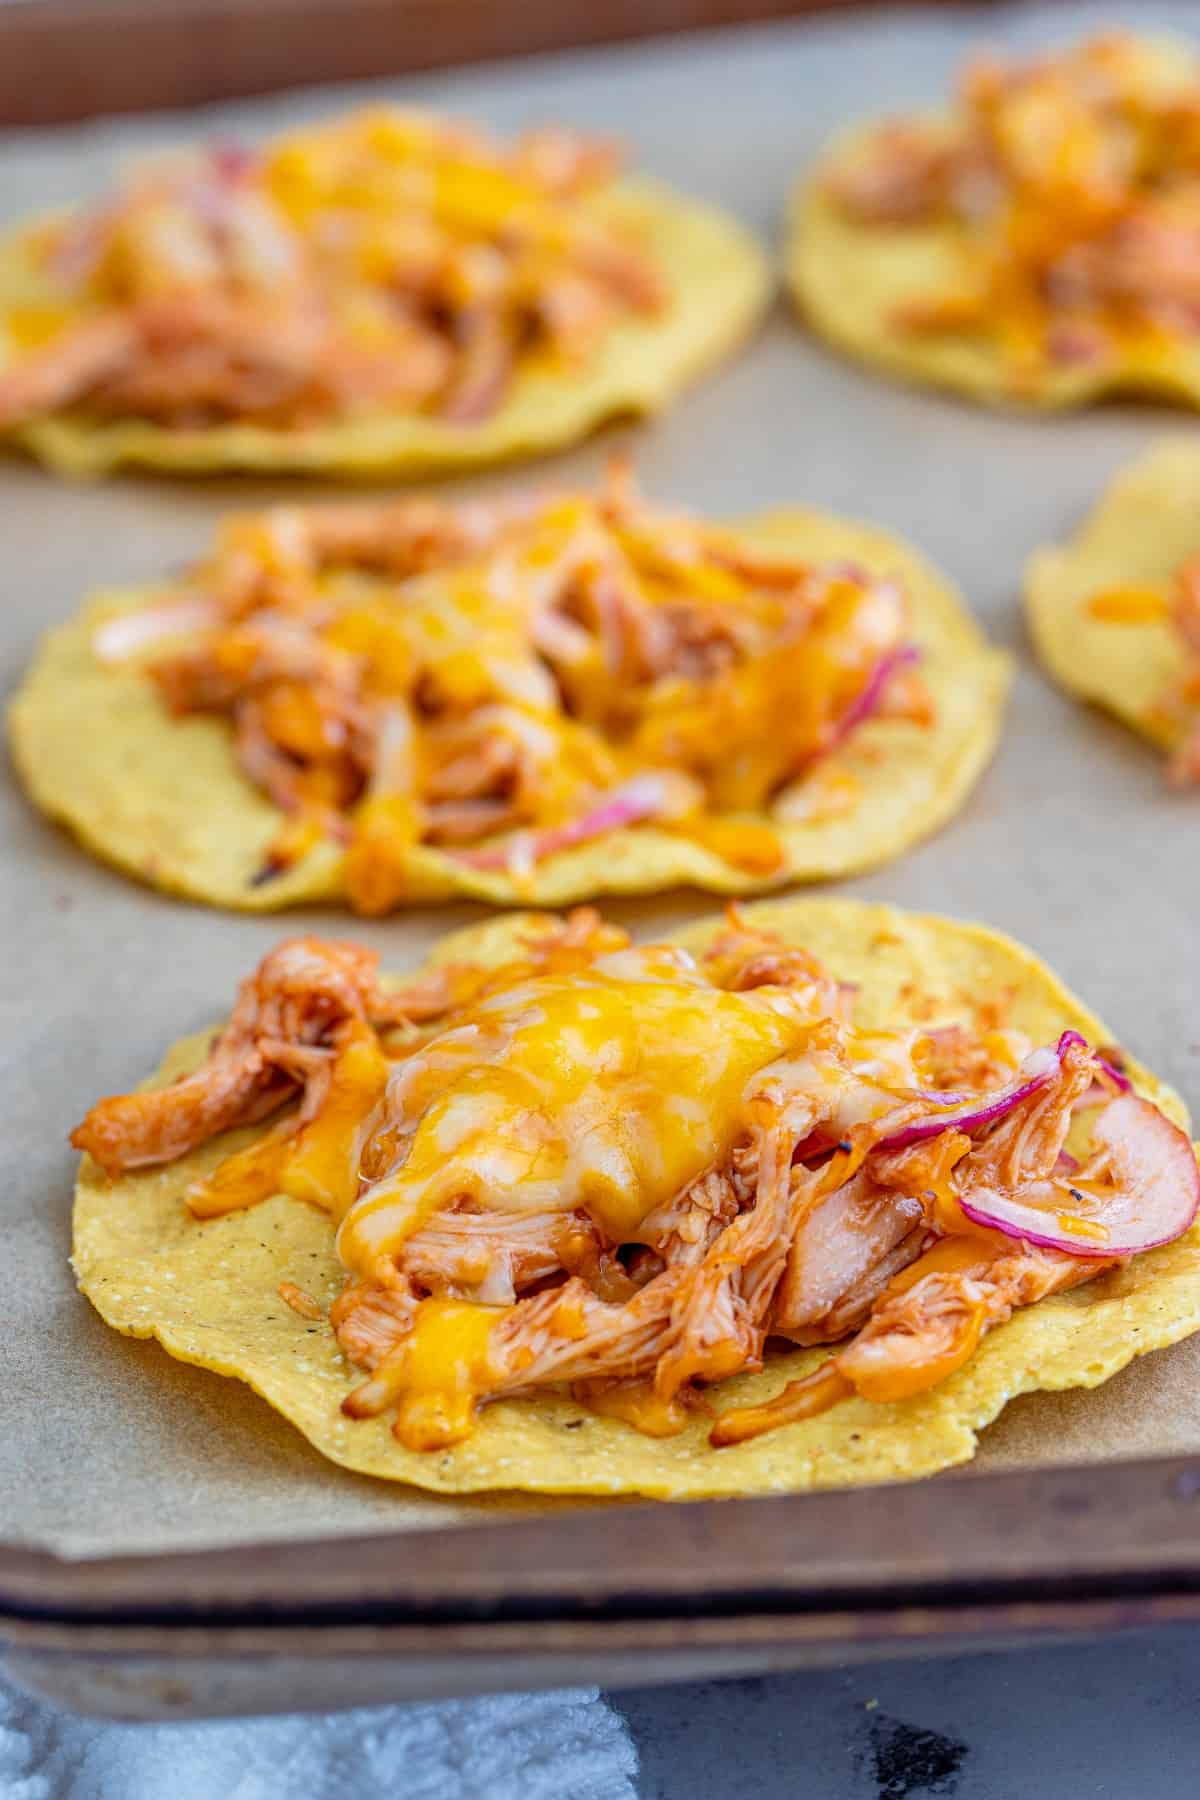 Showing melted cheese on a tostada hot out of the oven. 